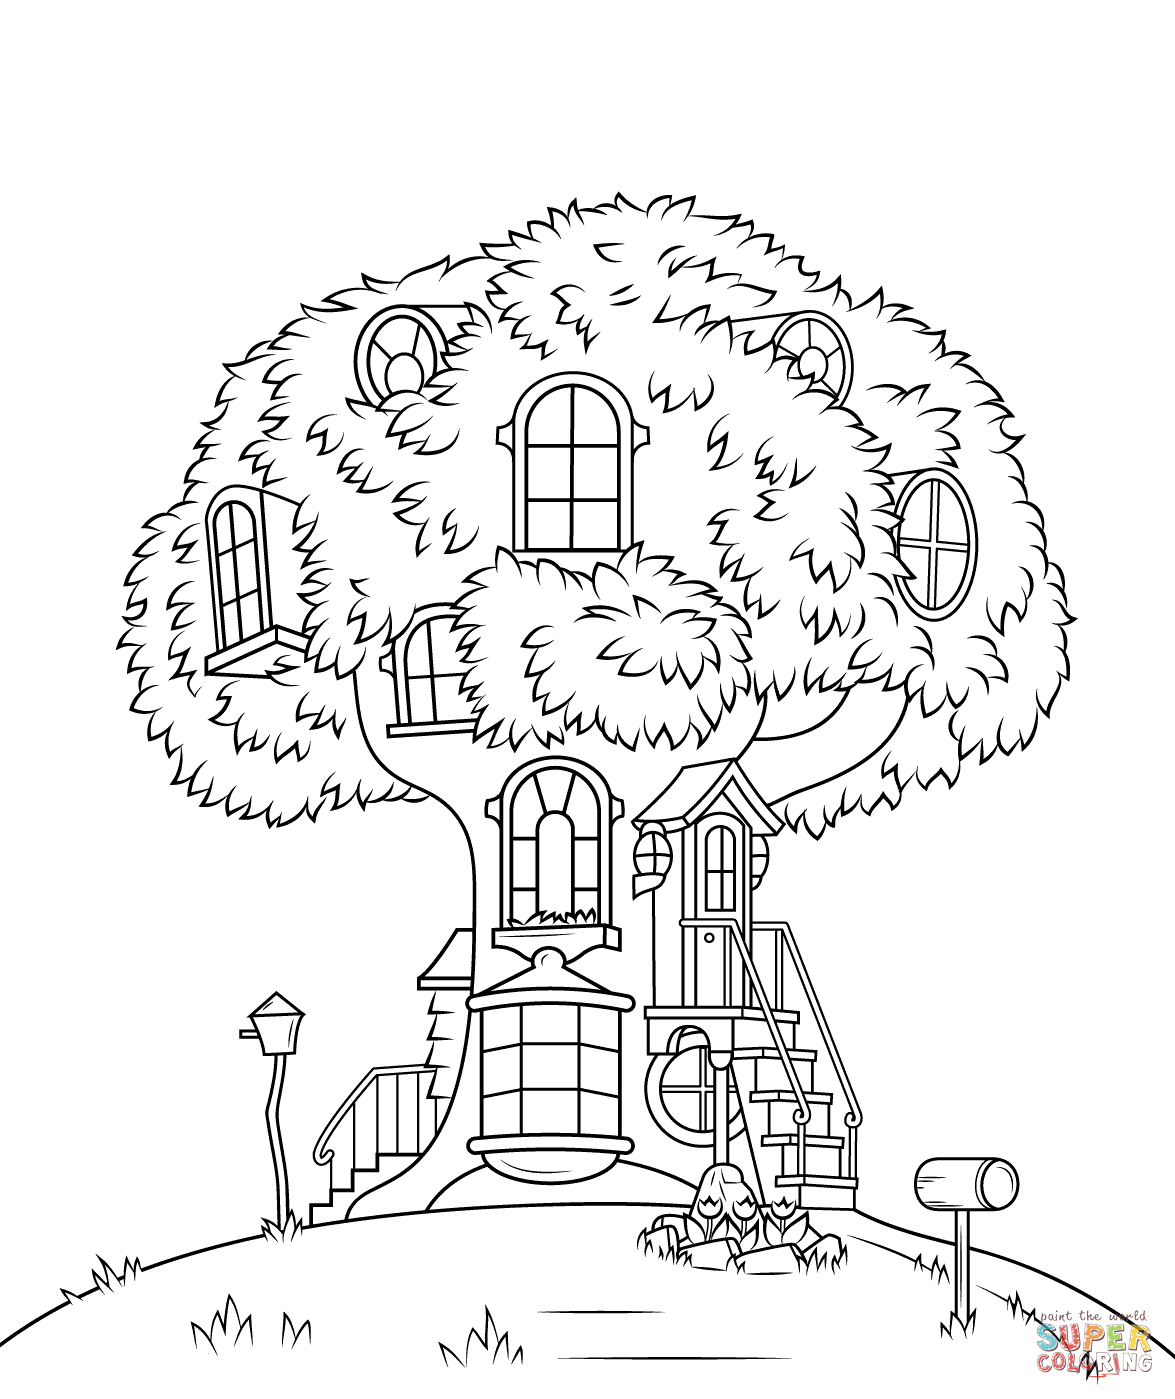 Berenstain Bears Treehouse coloring page